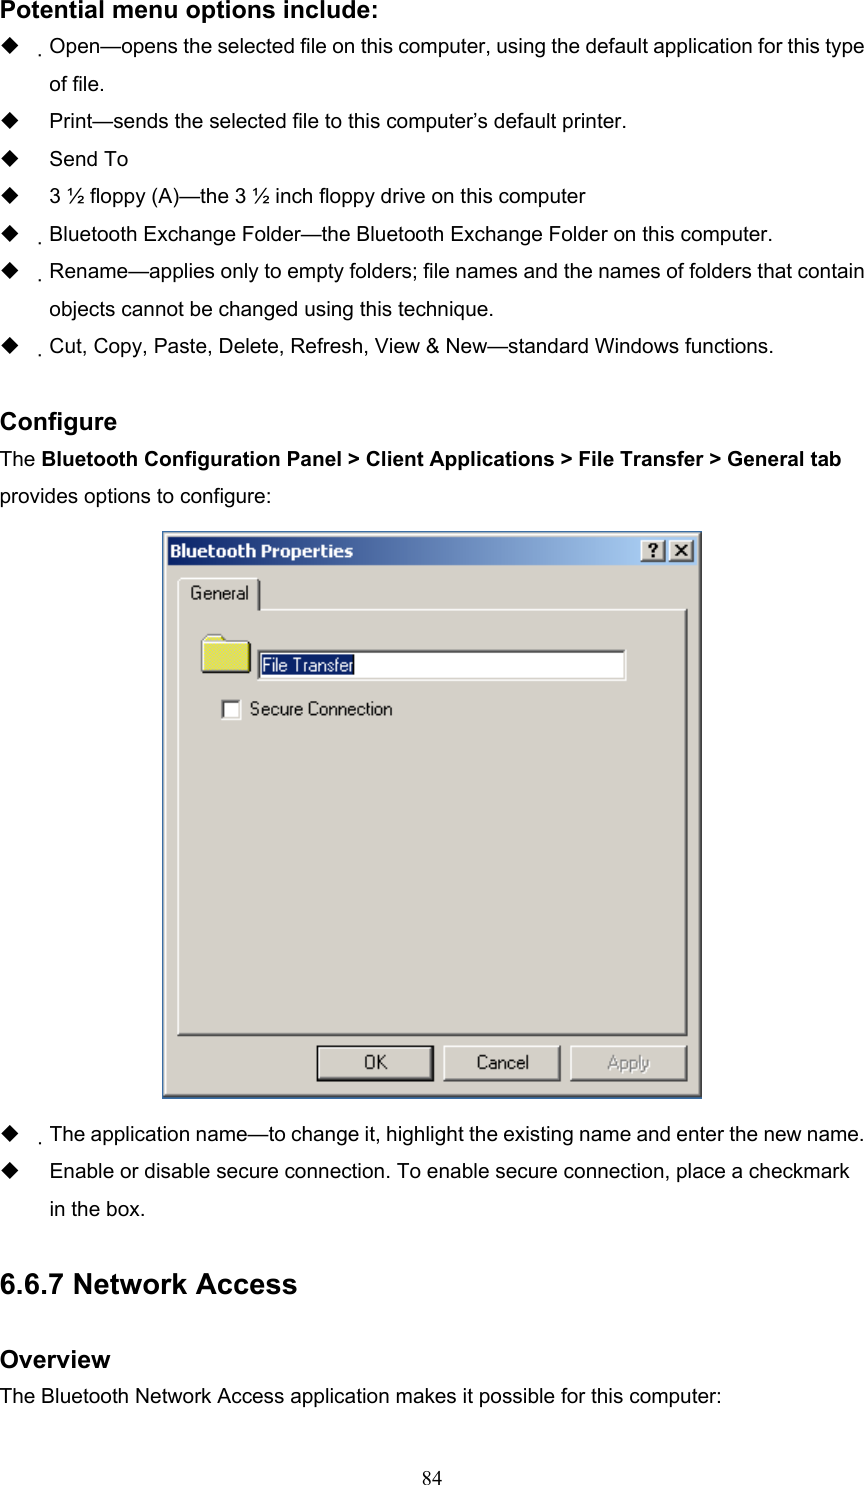  84 Potential menu options include:   Open—opens the selected file on this computer, using the default application for this type of file.   Print—sends the selected file to this computer’s default printer.   Send To   3 ½ floppy (A)—the 3 ½ inch floppy drive on this computer   Bluetooth Exchange Folder—the Bluetooth Exchange Folder on this computer.   Rename—applies only to empty folders; file names and the names of folders that contain objects cannot be changed using this technique.   Cut, Copy, Paste, Delete, Refresh, View &amp; New—standard Windows functions.  Configure The Bluetooth Configuration Panel &gt; Client Applications &gt; File Transfer &gt; General tab provides options to configure:    The application name—to change it, highlight the existing name and enter the new name.   Enable or disable secure connection. To enable secure connection, place a checkmark in the box.  6.6.7 Network Access  Overview The Bluetooth Network Access application makes it possible for this computer: 